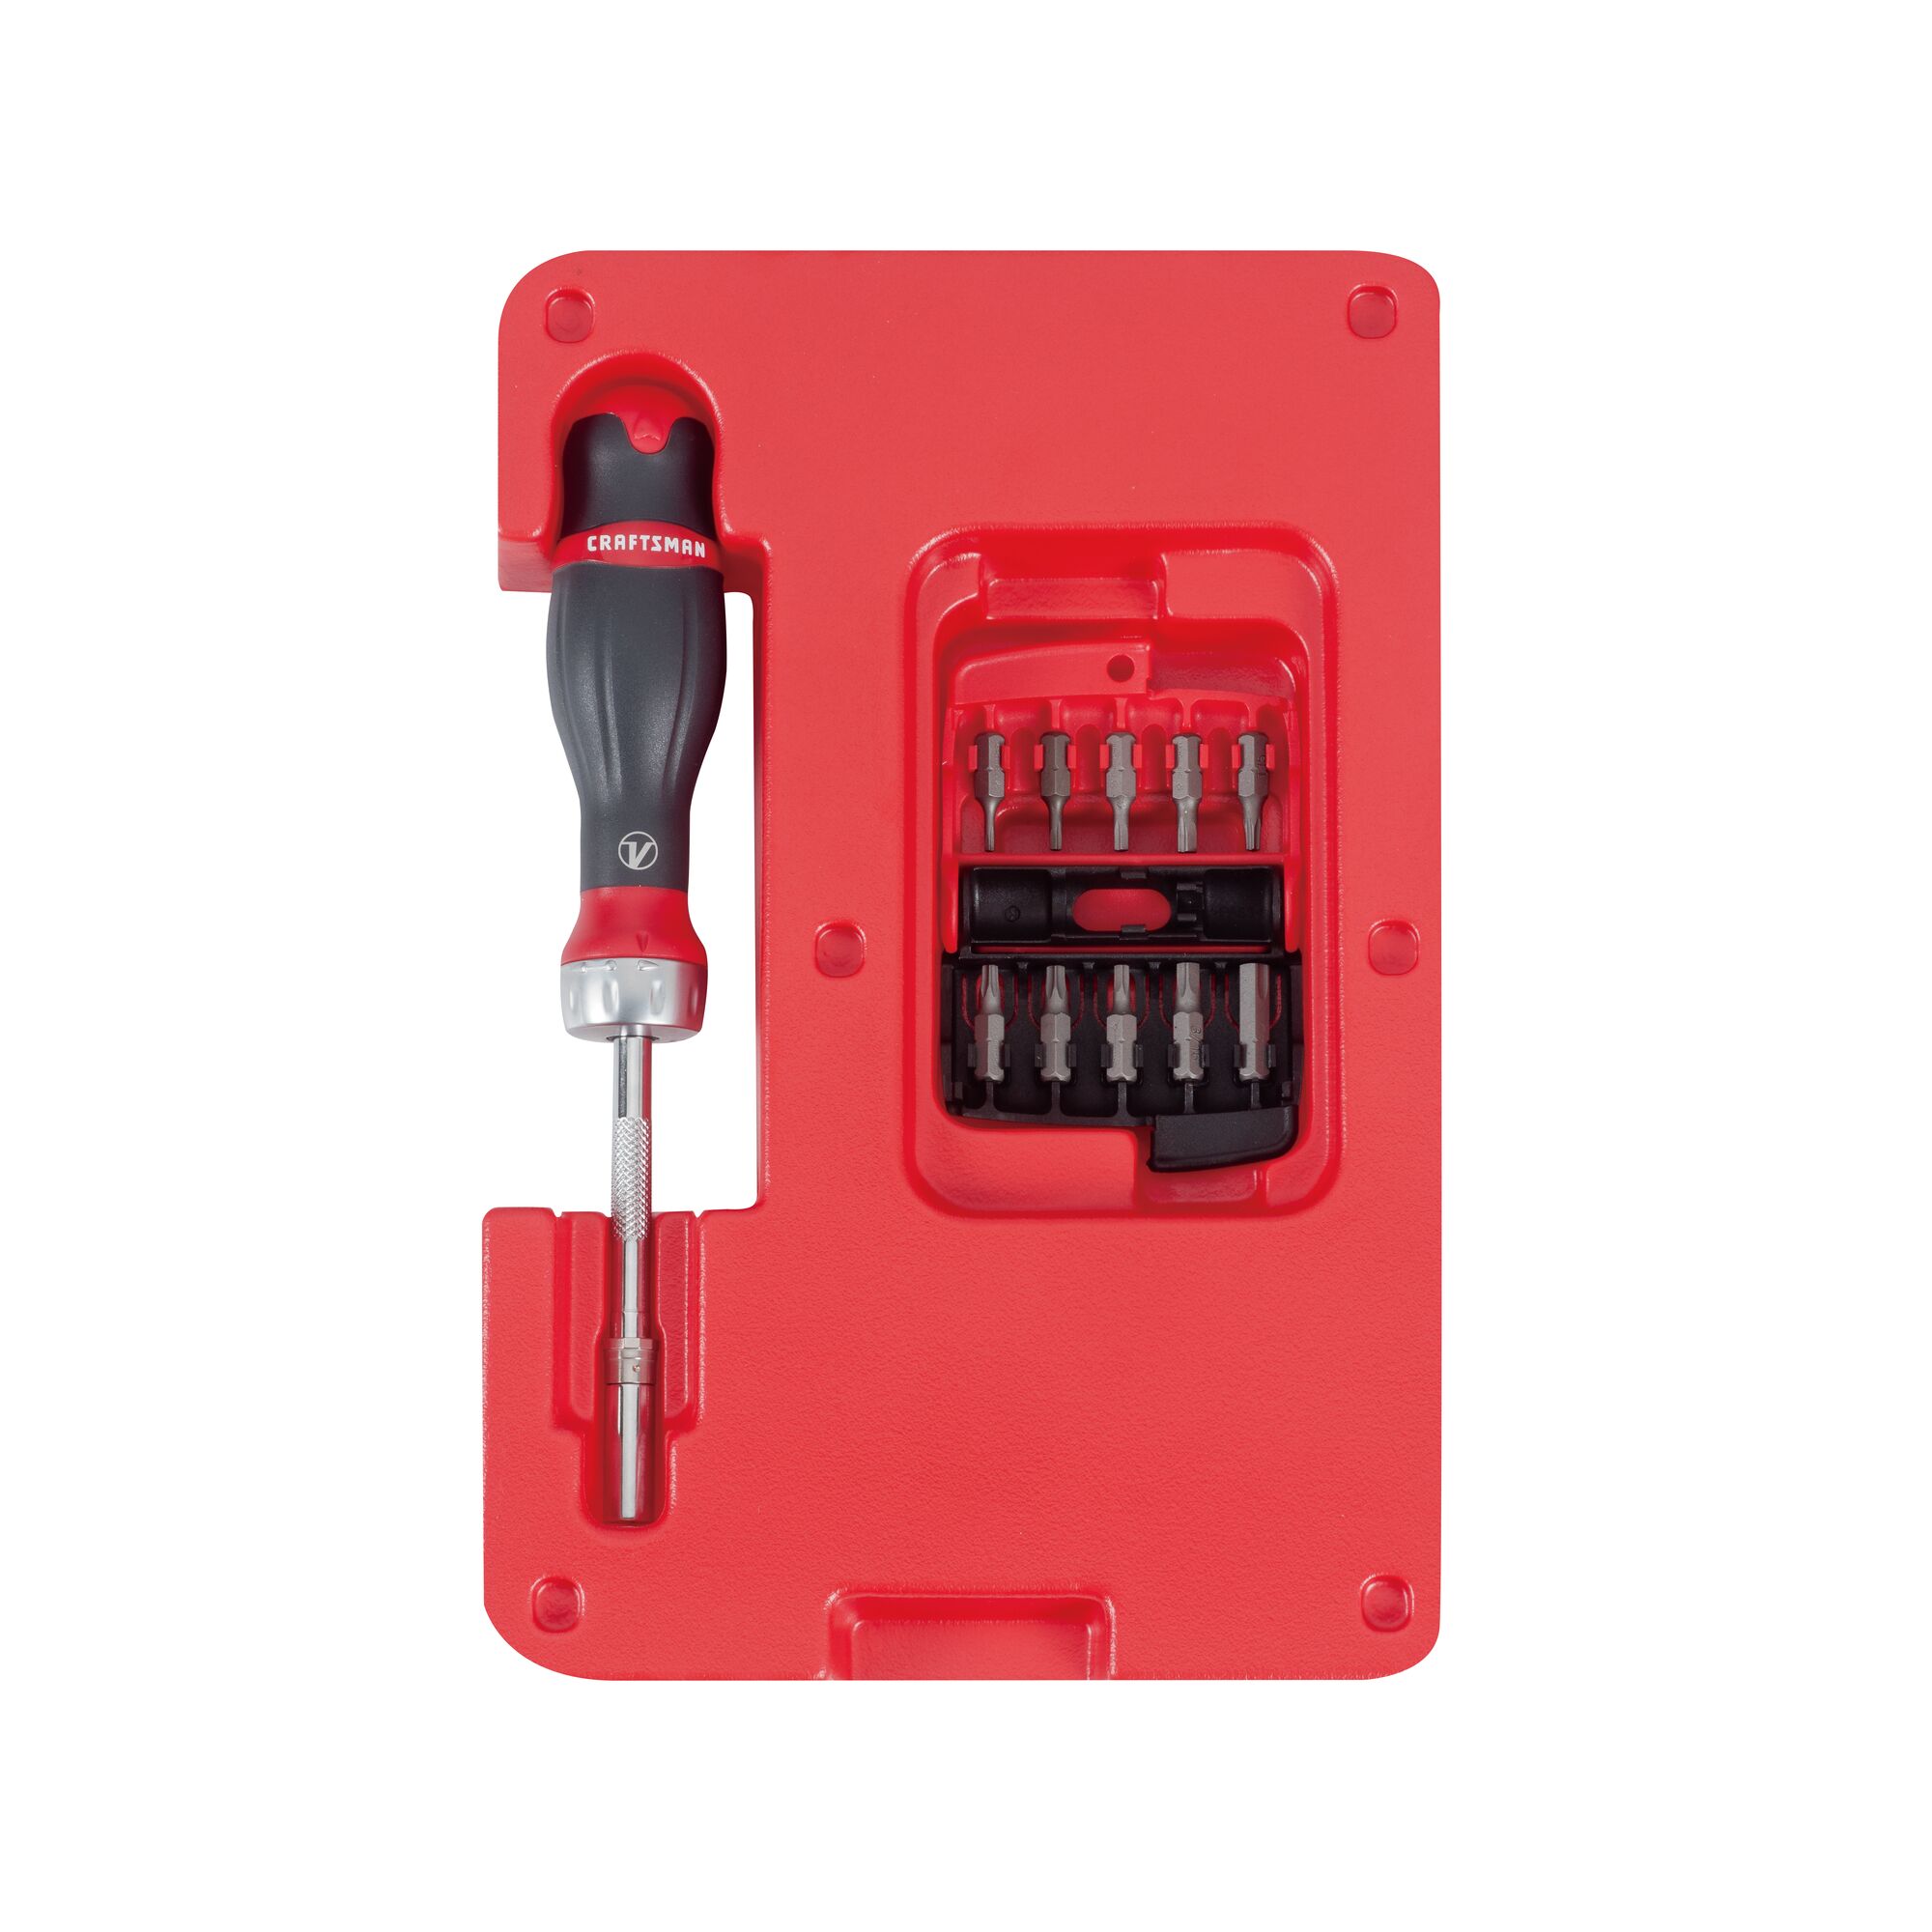 V Series 18 piece Ratcheting ScrewDriver X Tract Technology Bit Set in packaging.